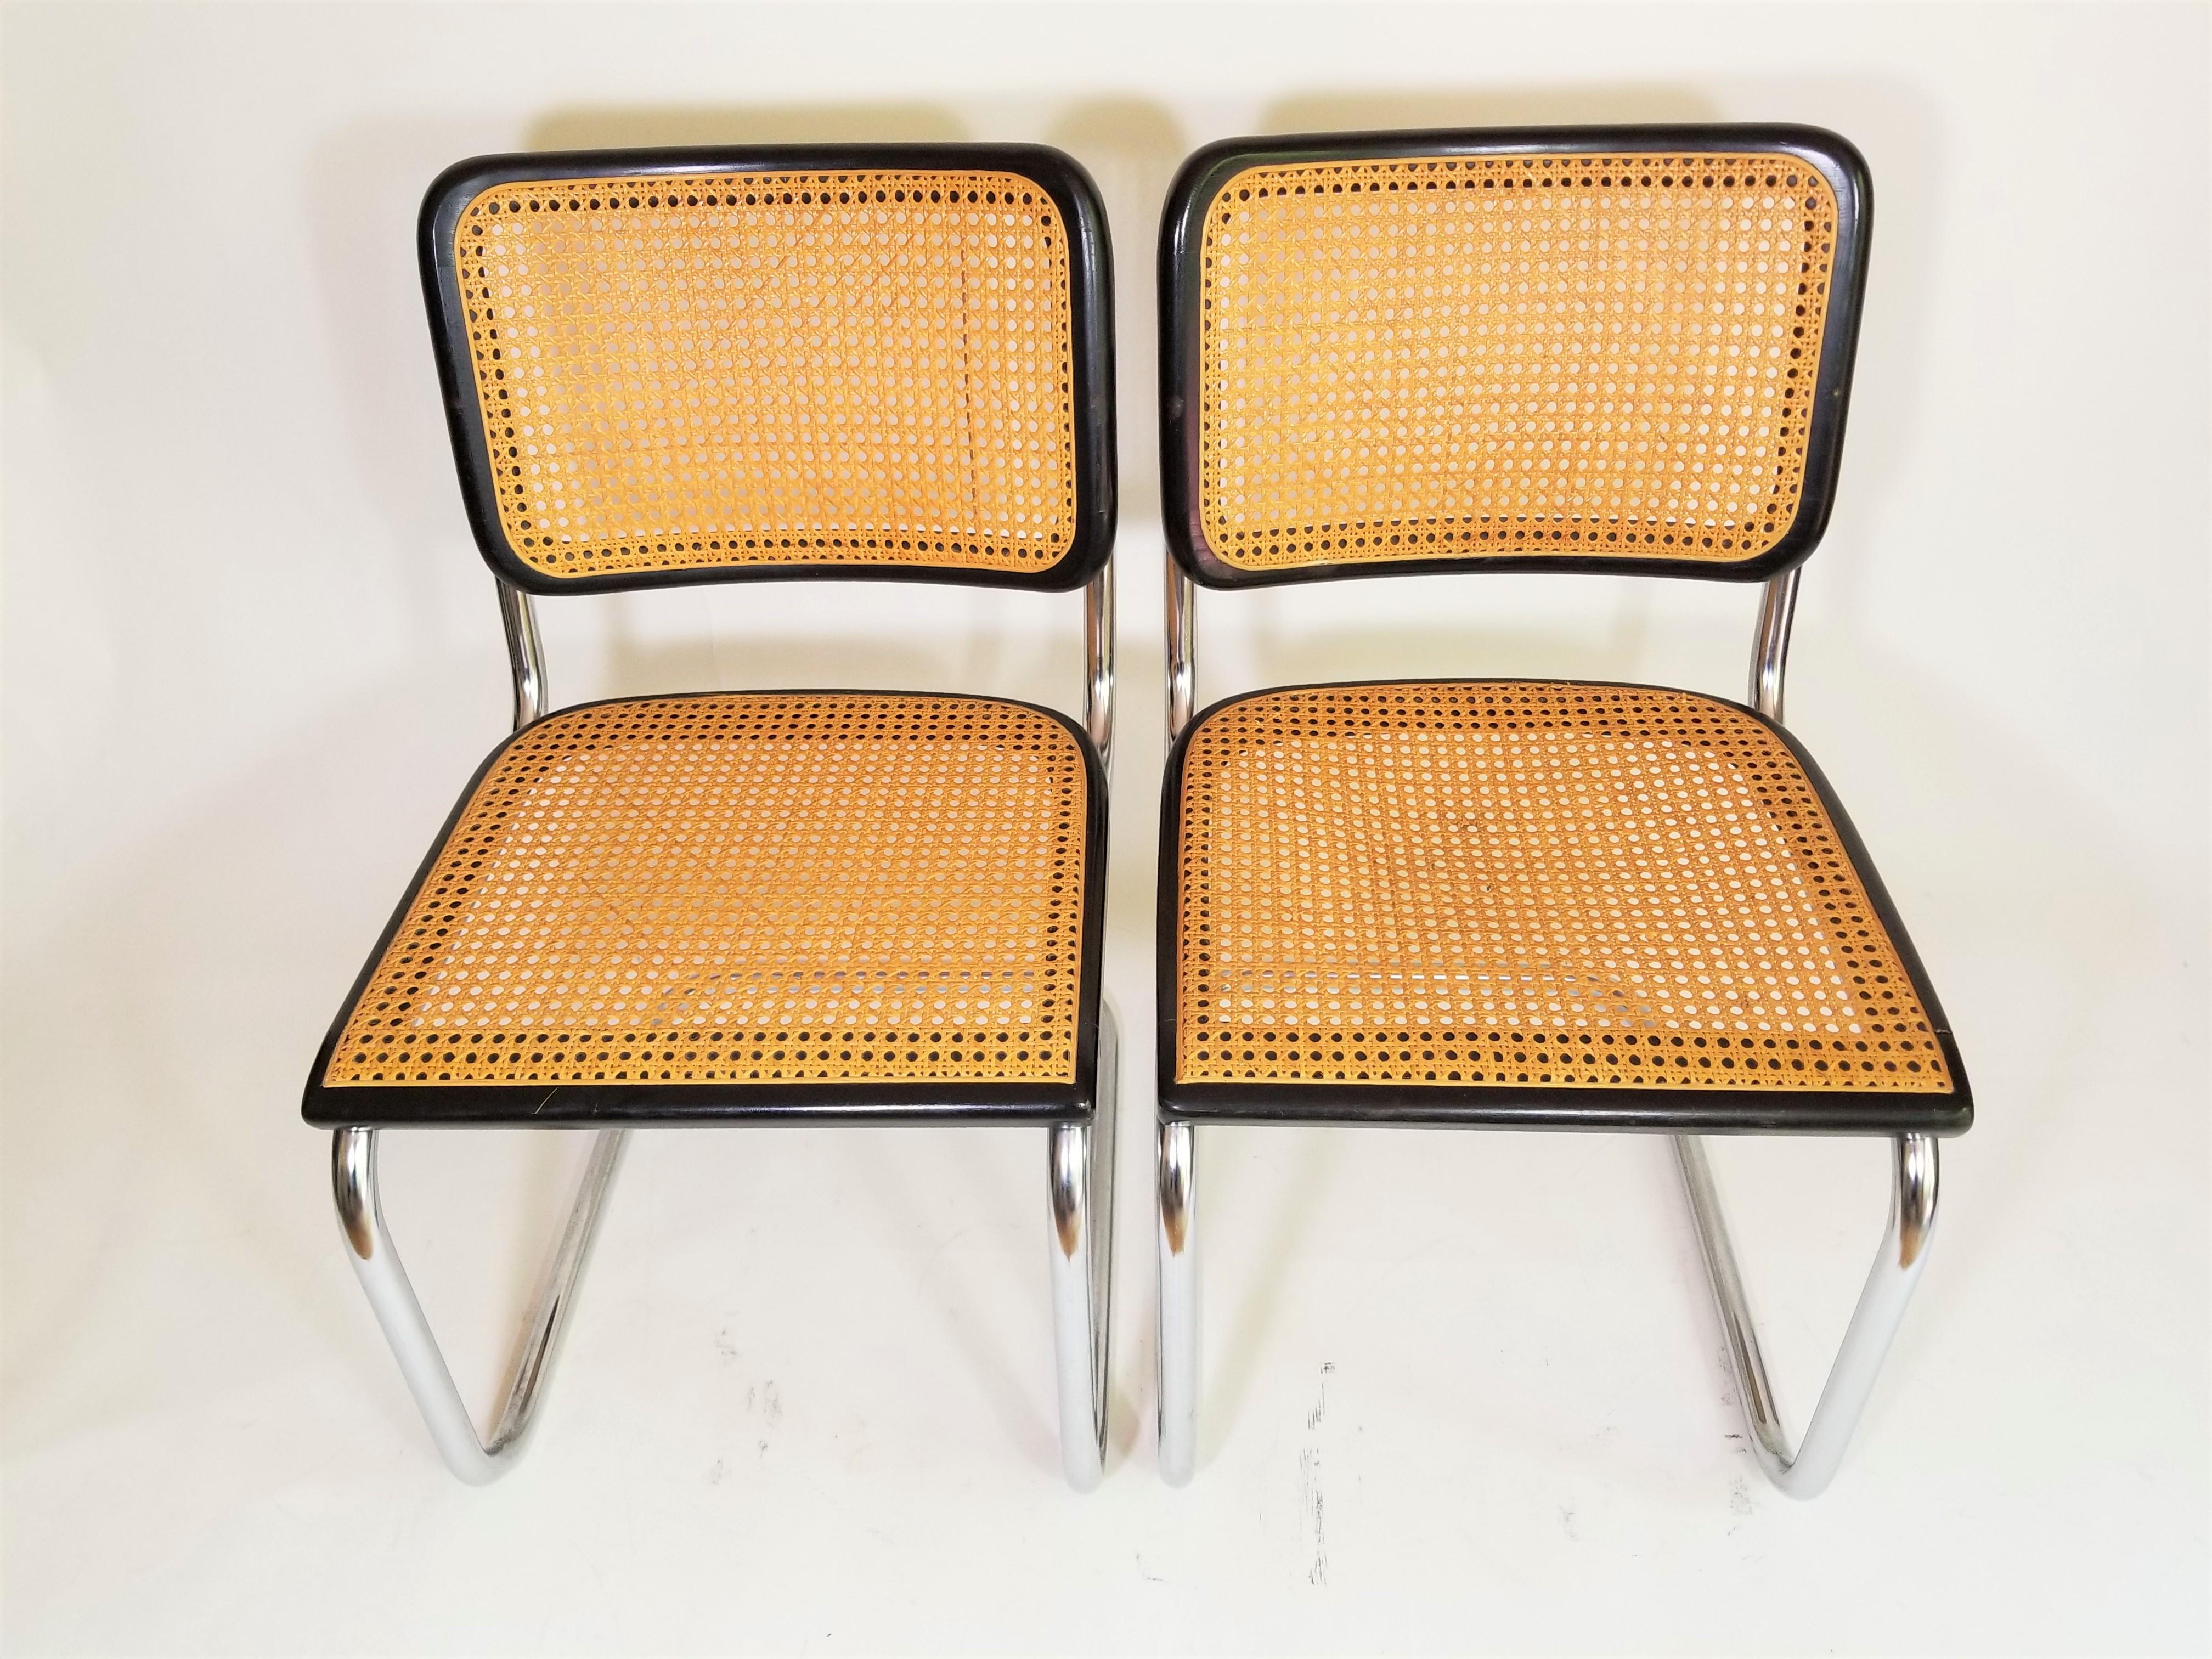 Midcentury Marcel Breuer chairs by Thonet aquired from the original owner who purchased them in 1960s. Caning intact and nicely aged caramel color. Black finish. Classic Chrome tubular frames. 

Complimentary delivery in NYC and surrounding areas